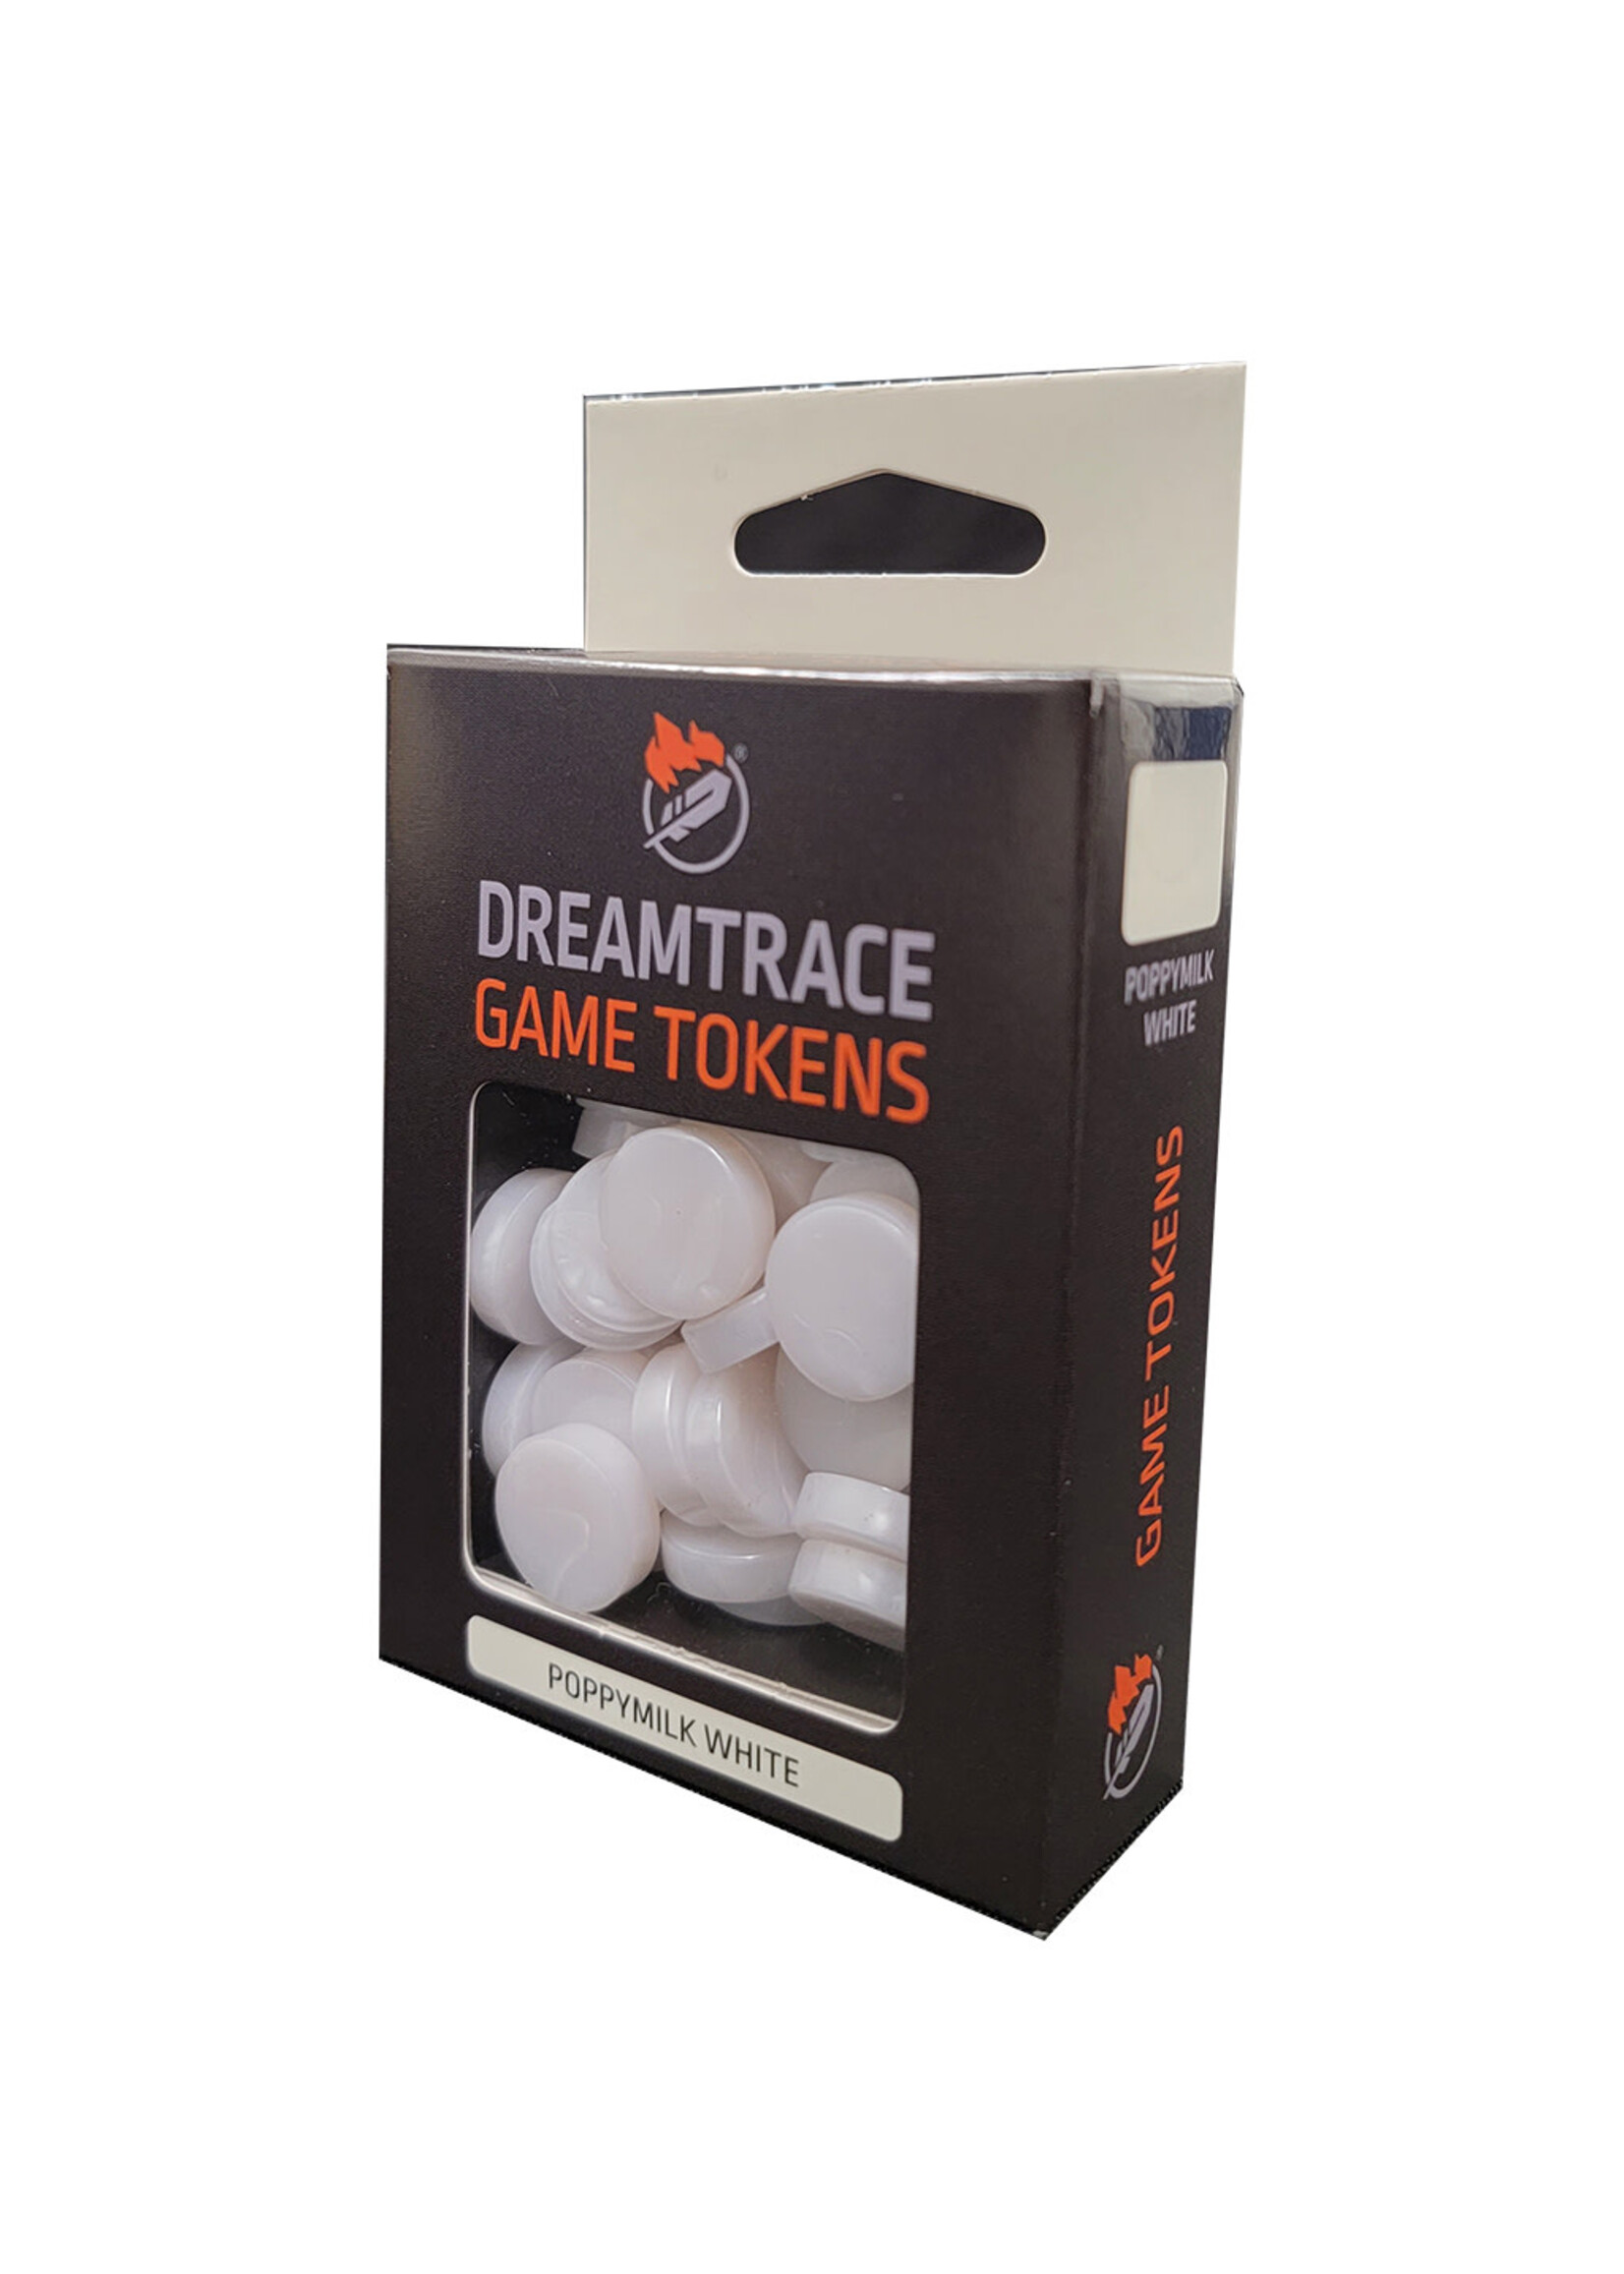 Ghost Galaxy DreamTrace Gaming Tokens: Poppymilk White